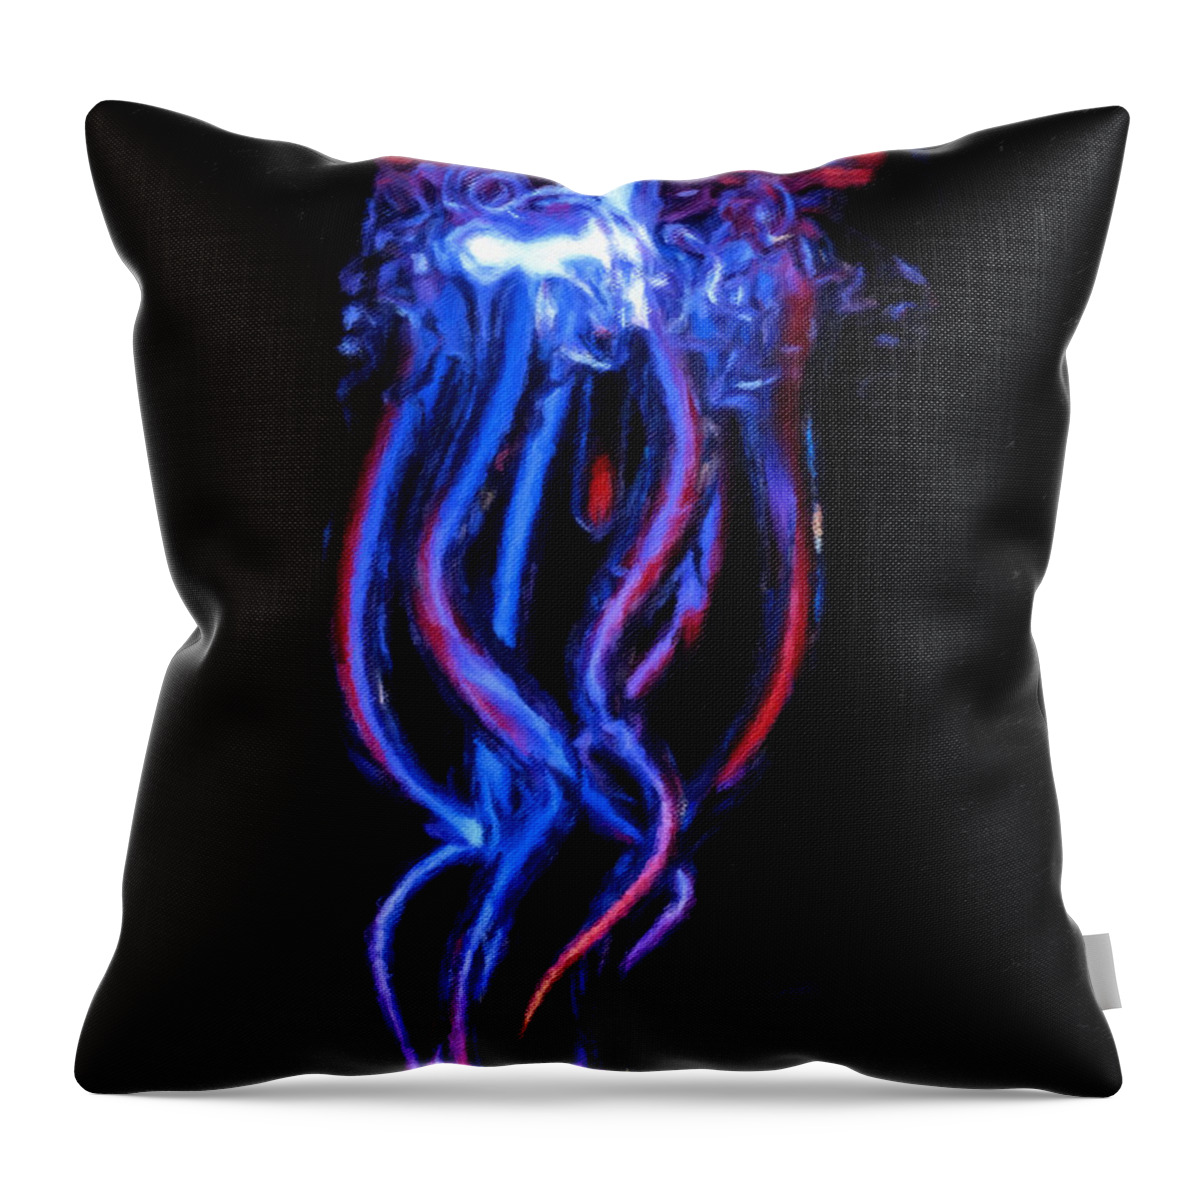 Shimmer Throw Pillow featuring the painting Shimmer by Georgiana Romanovna